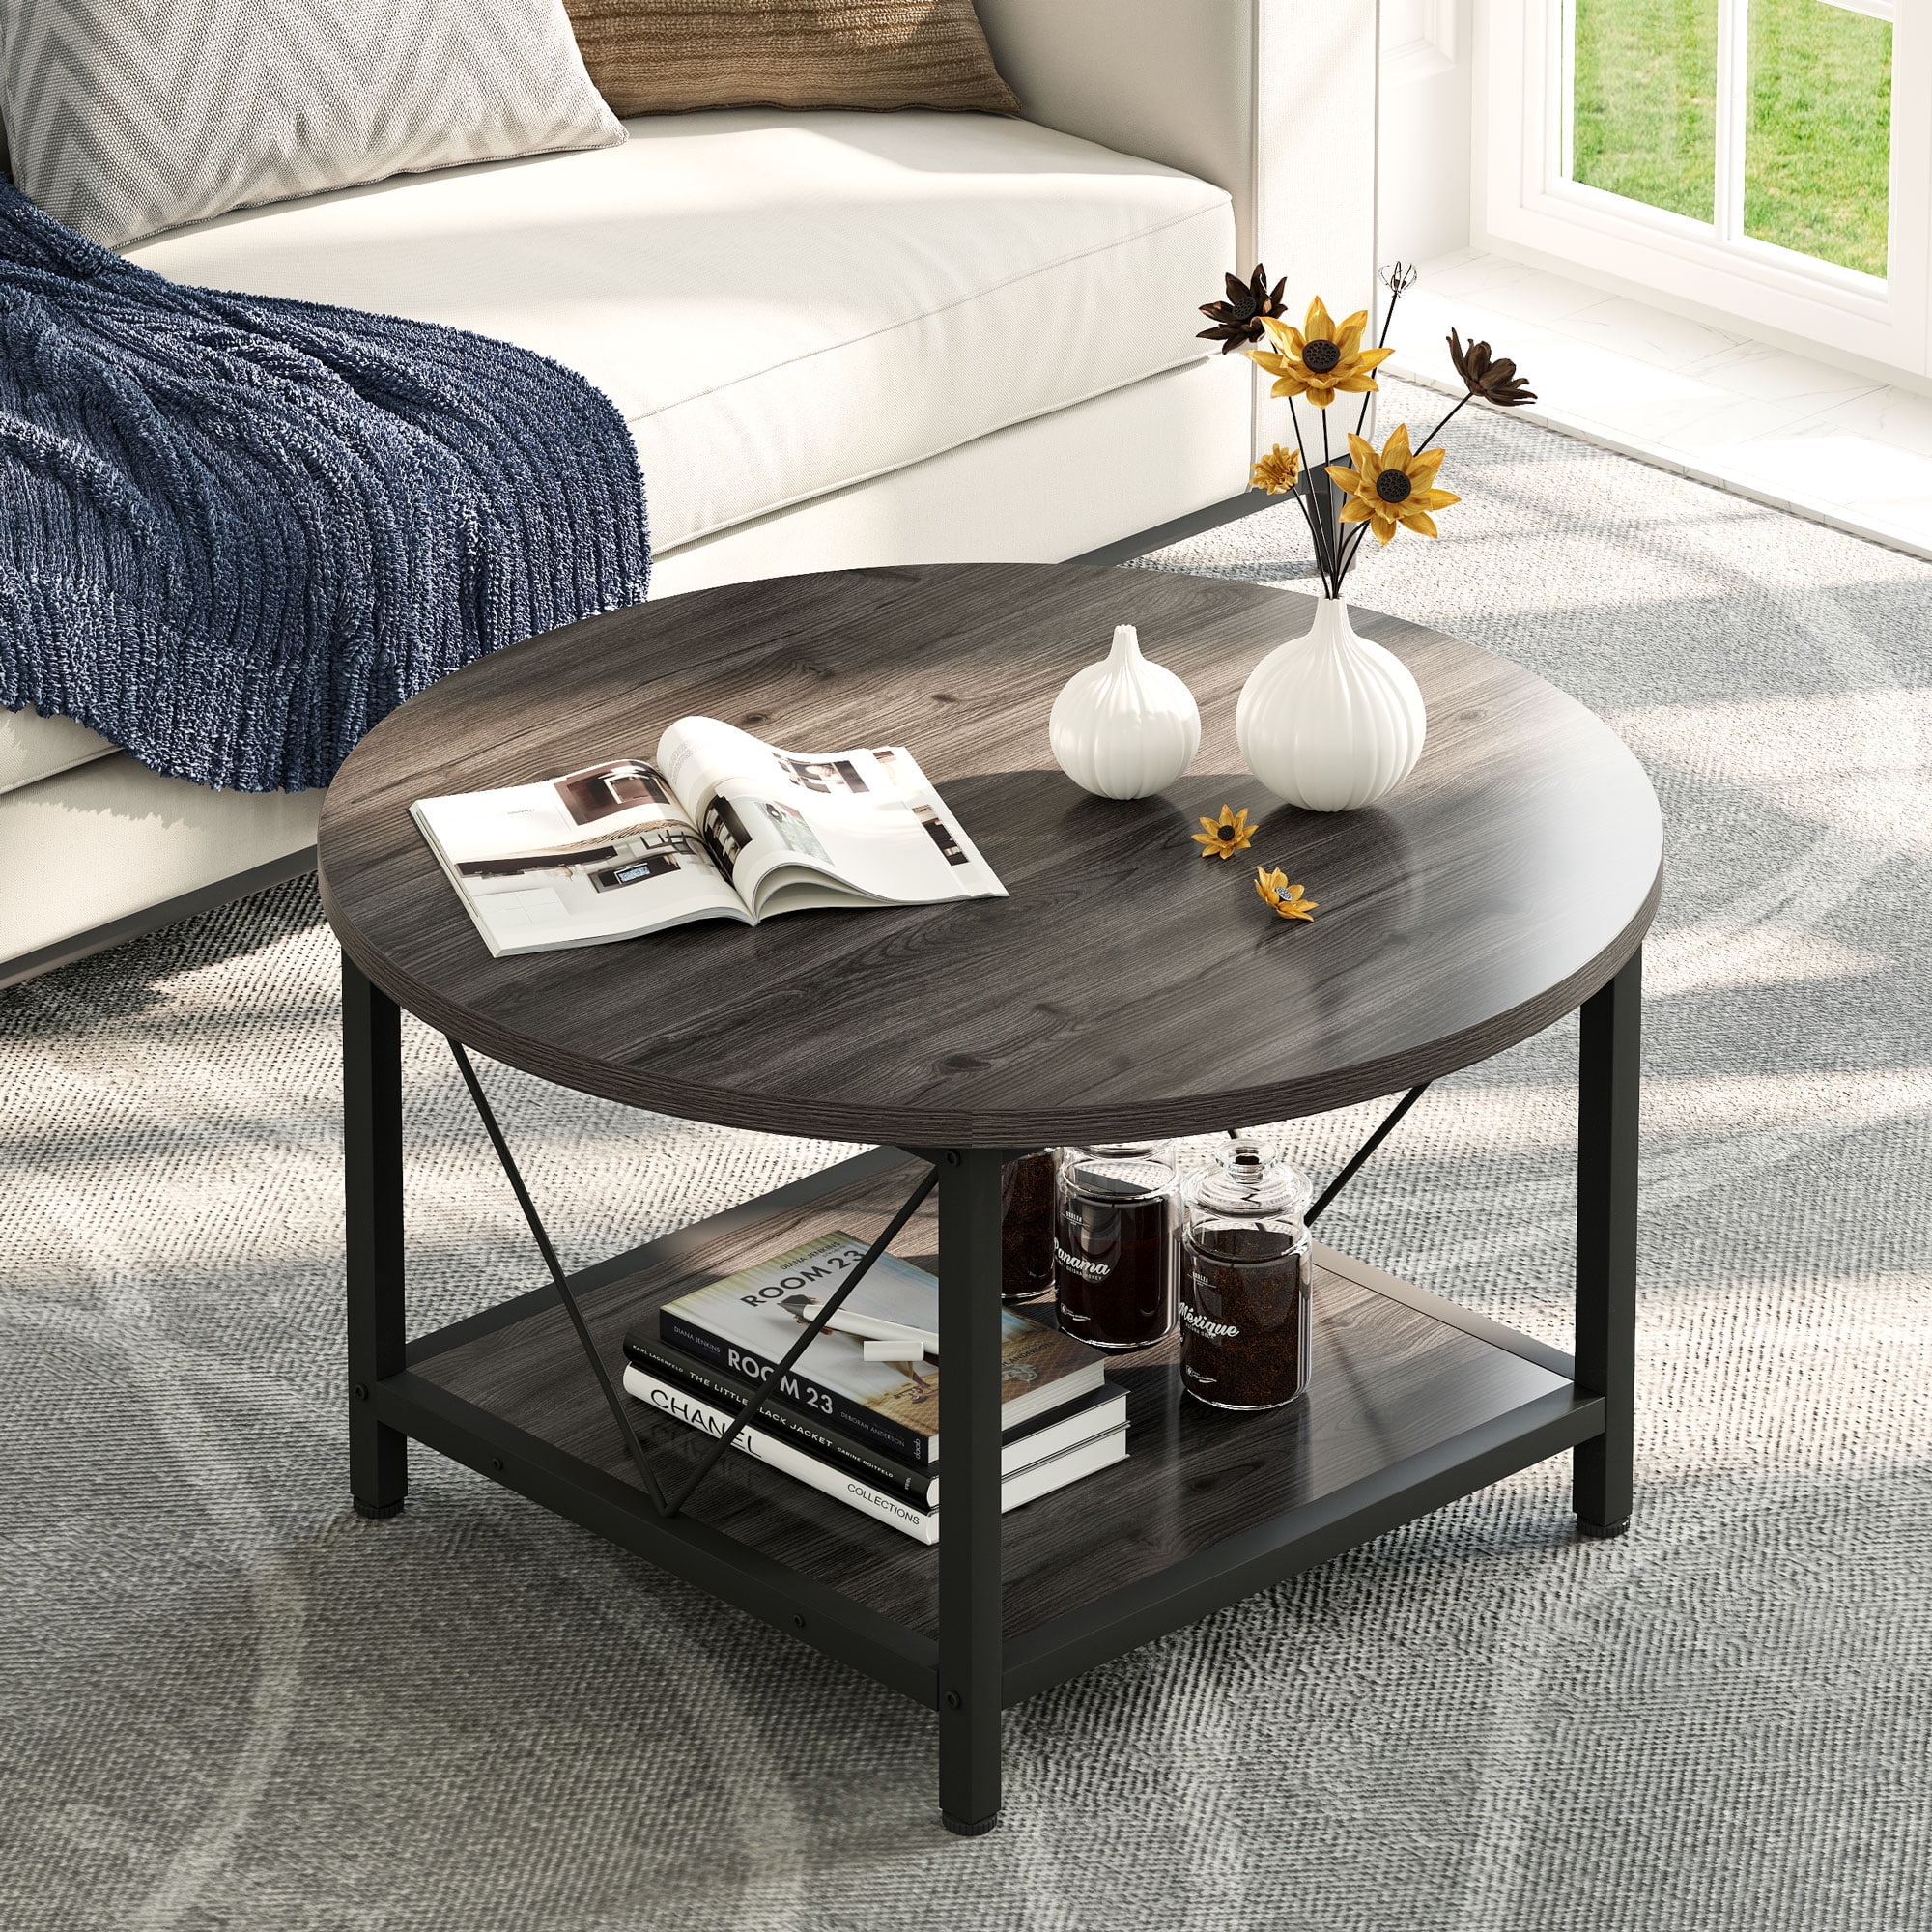 Dextrus Round Coffee Table With Storage Rustic Living Room Tables Sy Metal Legs Dark Gray Com